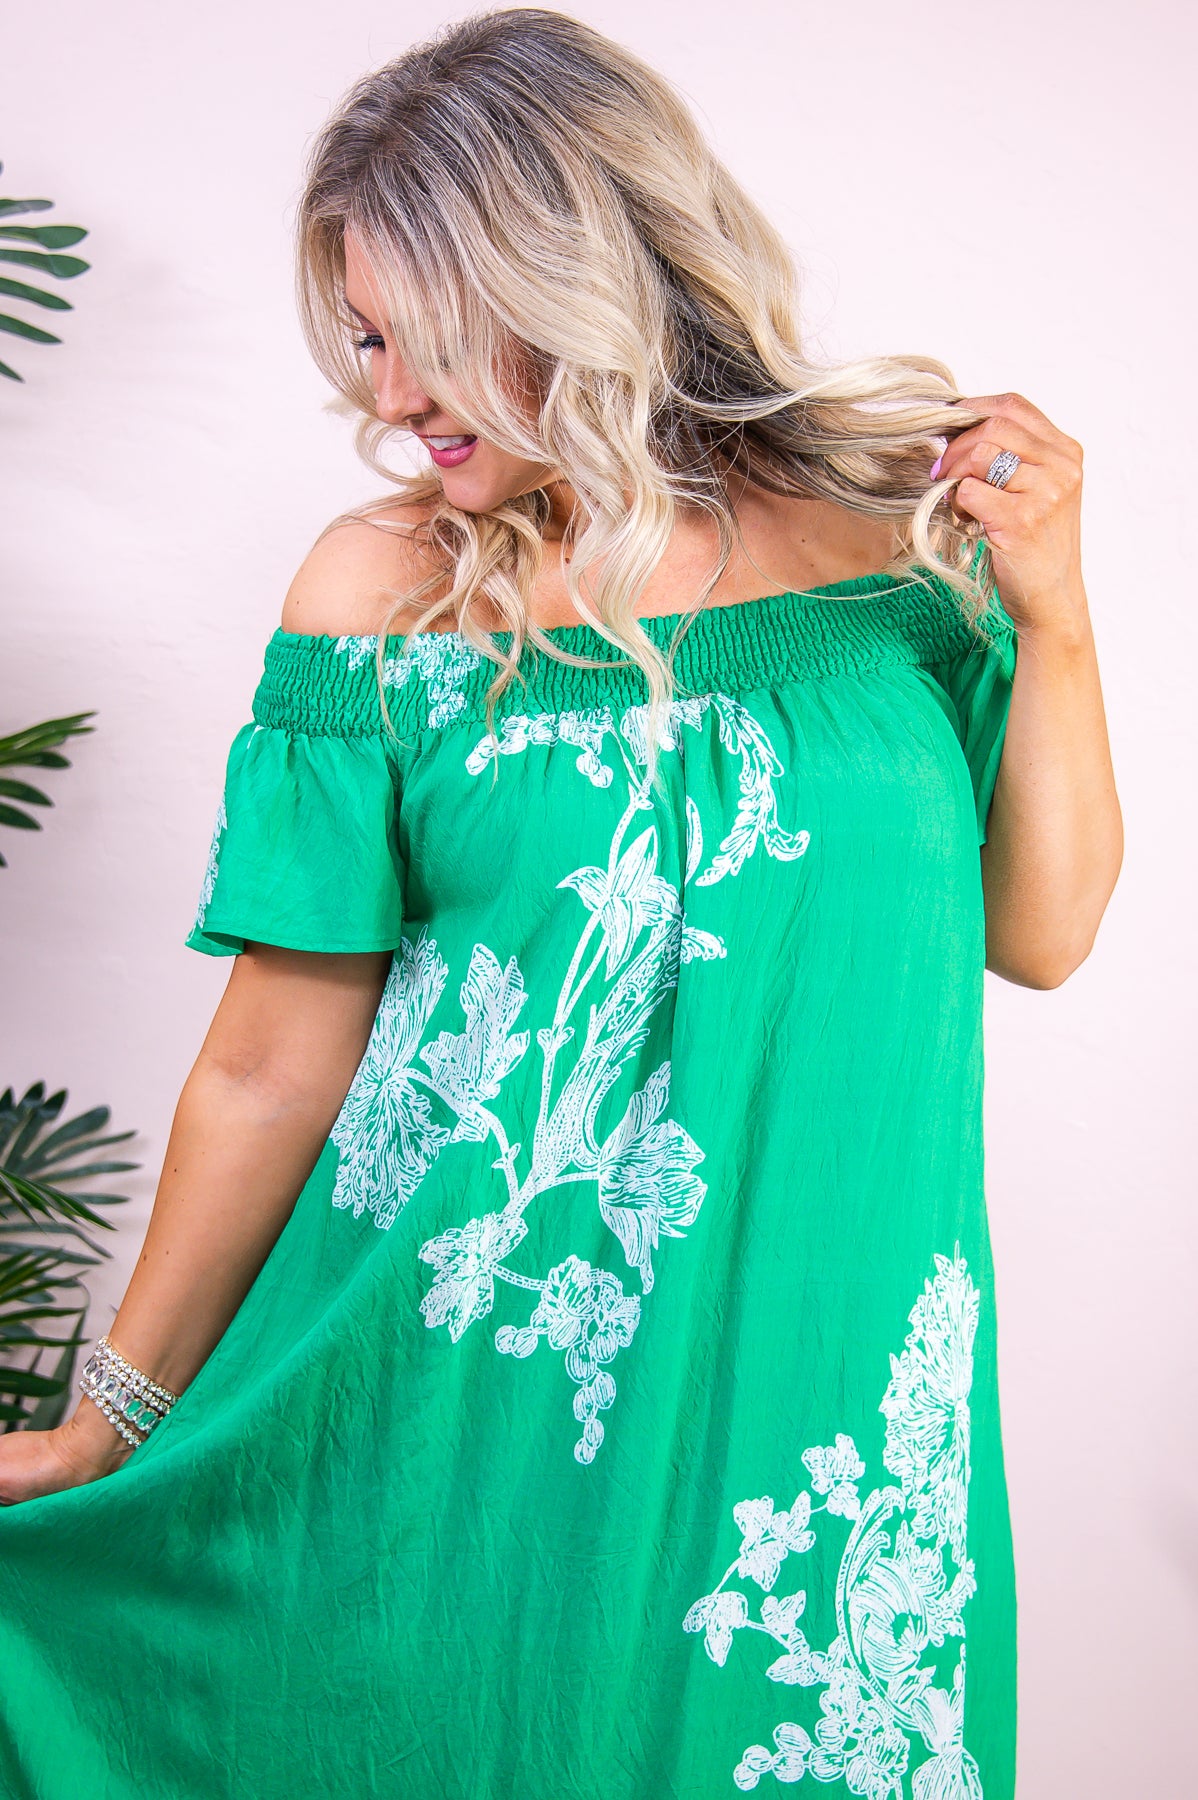 Spring In The Tropics Green/Ivory Floral Off The Shoulder Dress - D5173GN